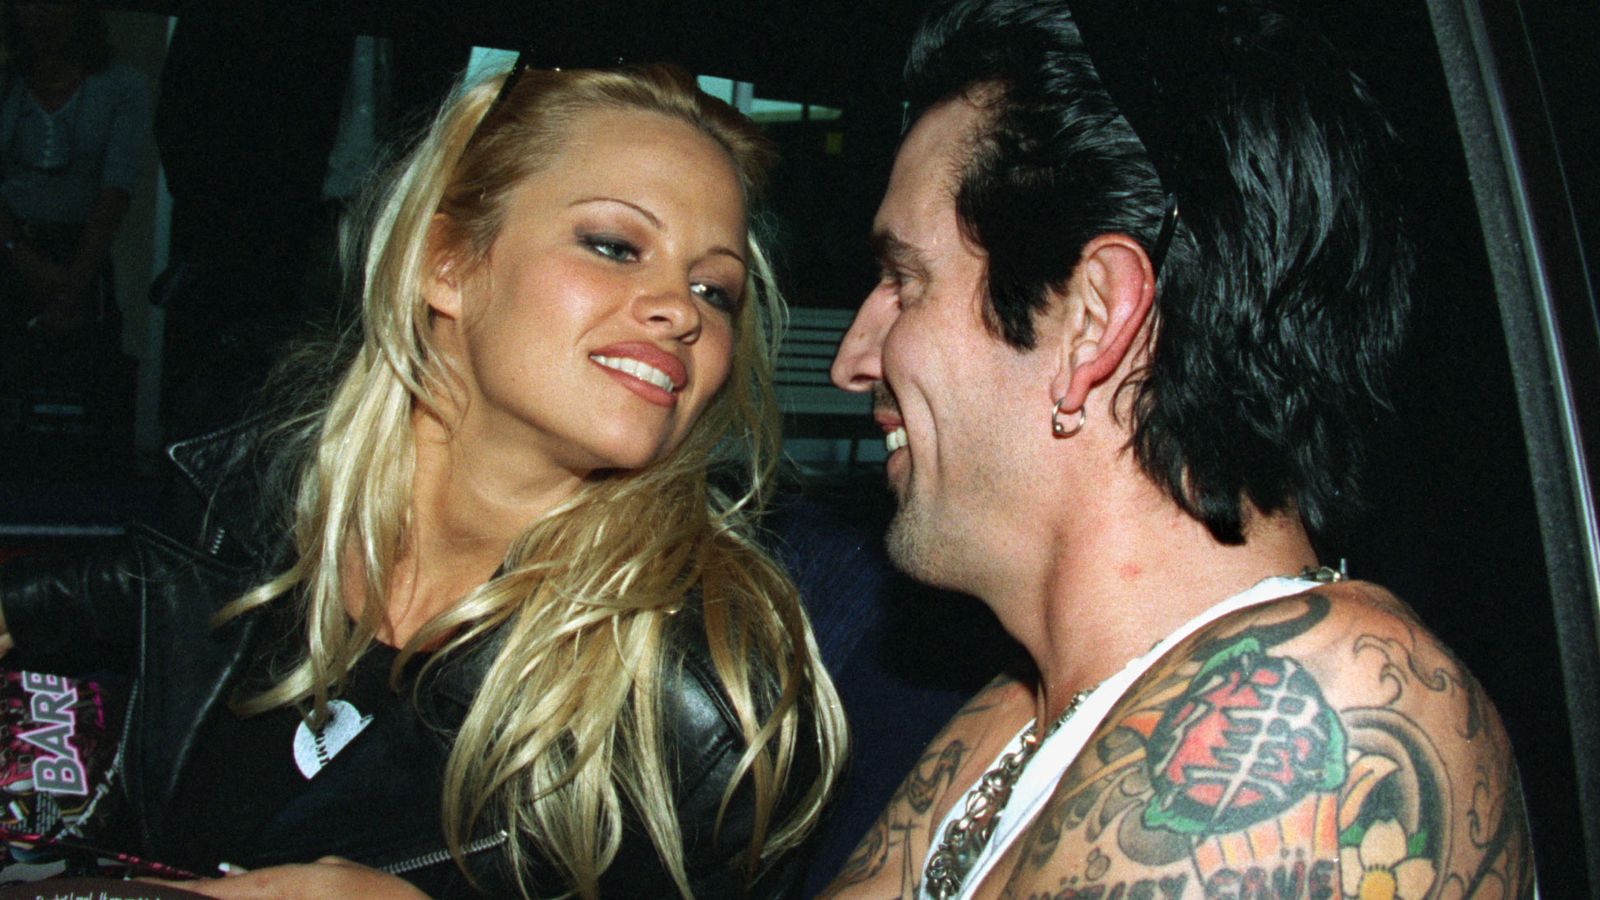 Pamela Anderson and Tommy Lee: New series Pam & Tommy and the story of the ultimate sex tape scandal - Sky News